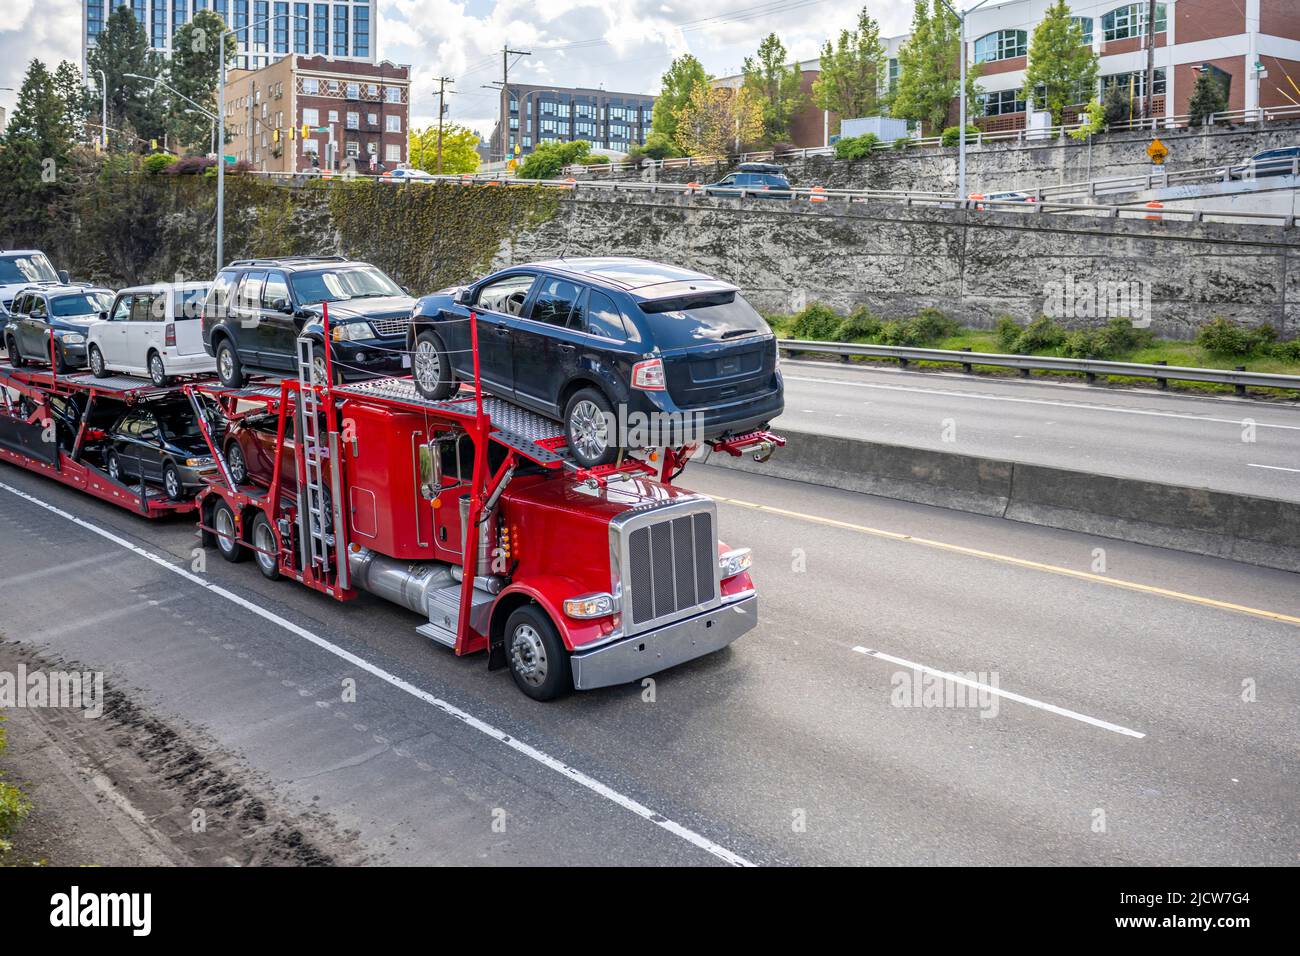 Loaded big rig industrial red car hauler semi truck tractor transporting vehicles on the modular hydraulic semi trailer running on the highway road at Stock Photo